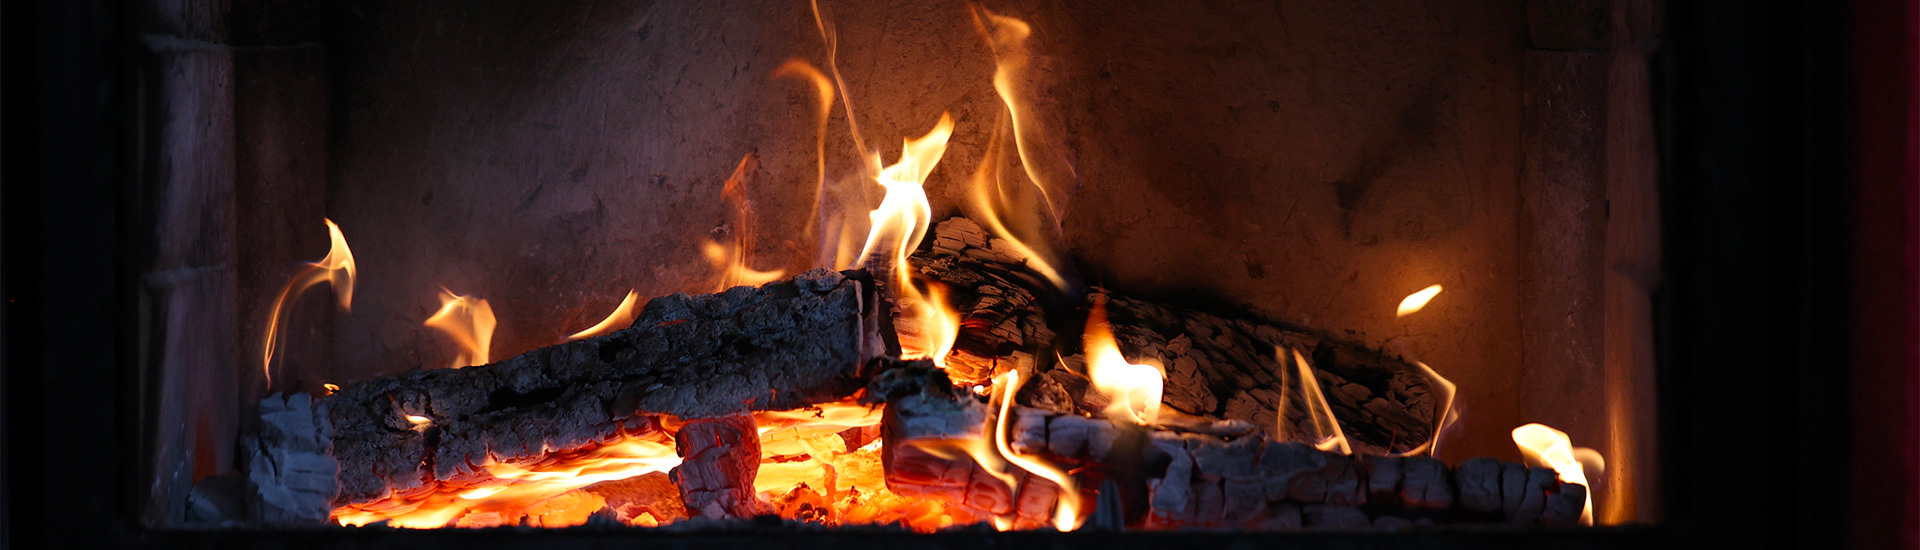 Advantages and defects of the fireplace in the house